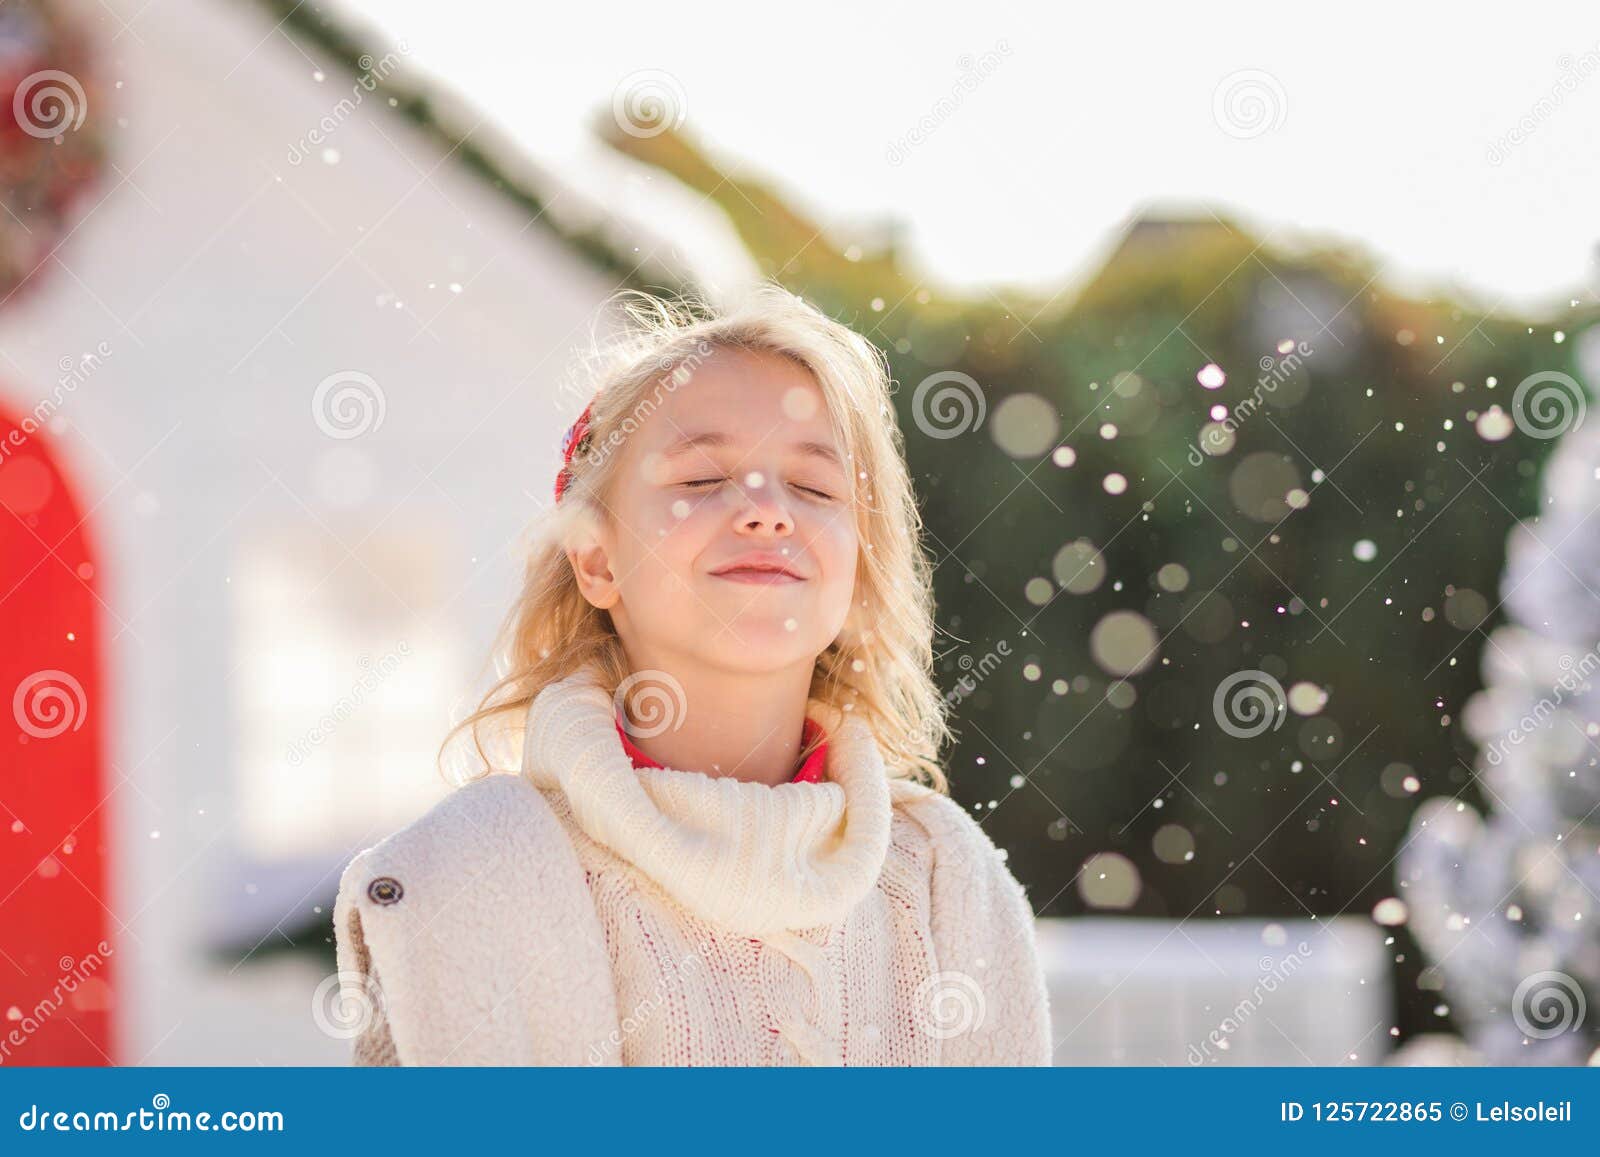 Cute Blonde Girl Near The Small House And Snow Covered Trees New Year